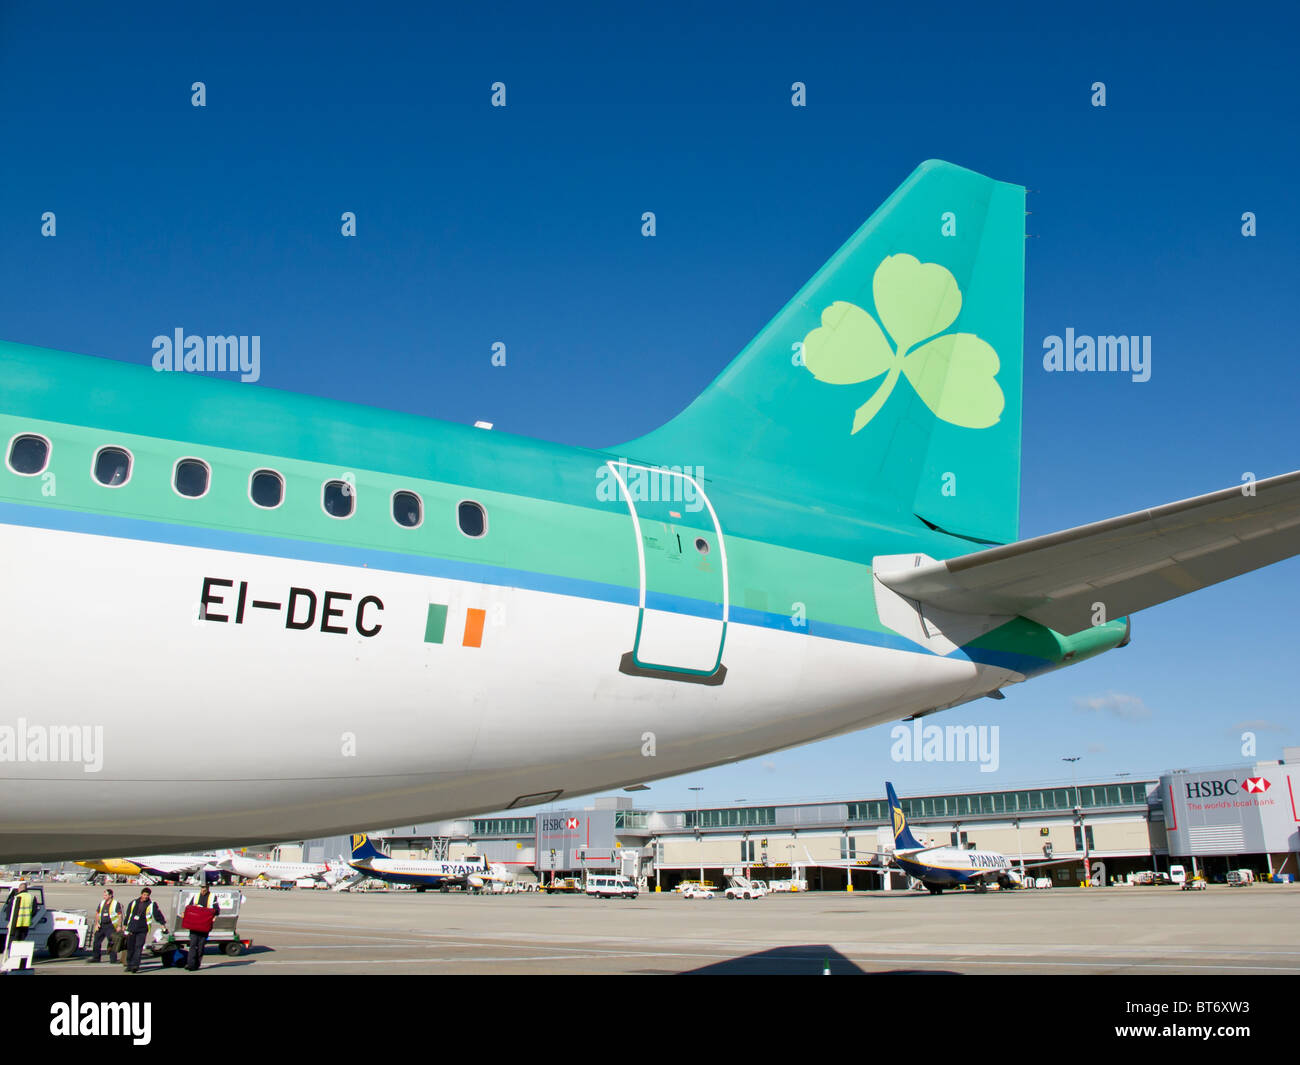 Tail of an Aer Lingus plane Stock Photo